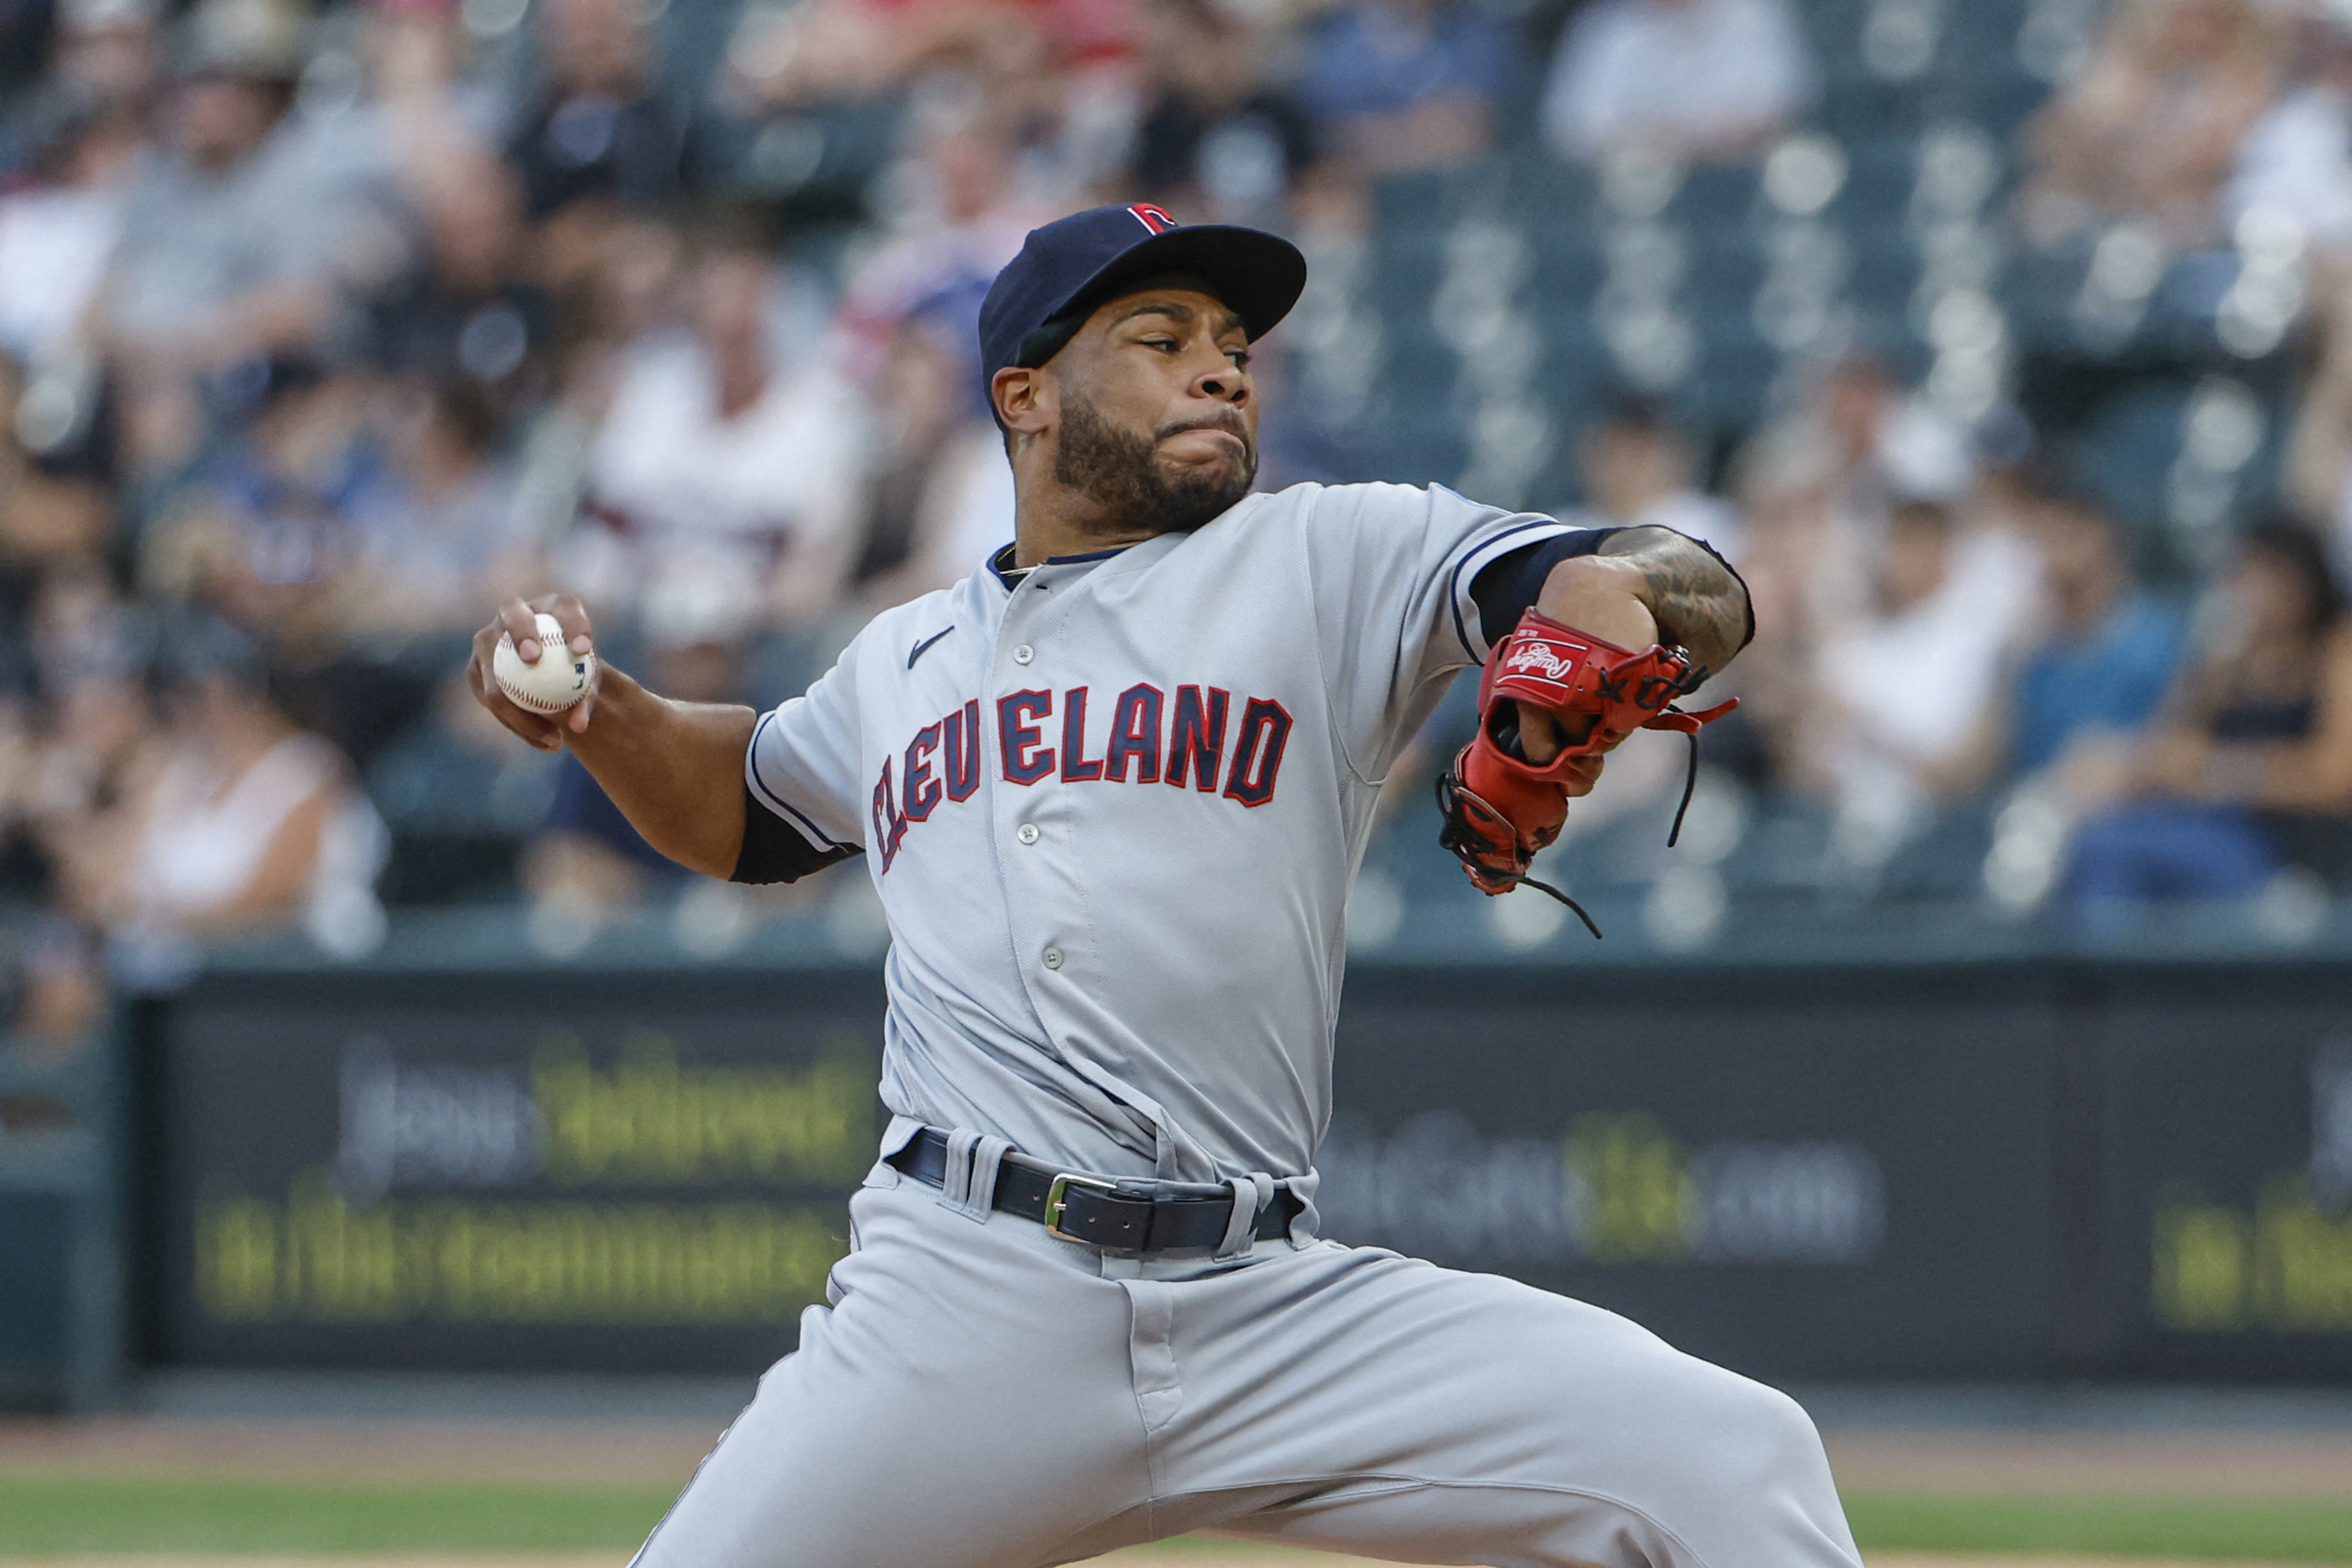 Chicago White Sox blank Cleveland Guardians, 3-0 - South Side Sox